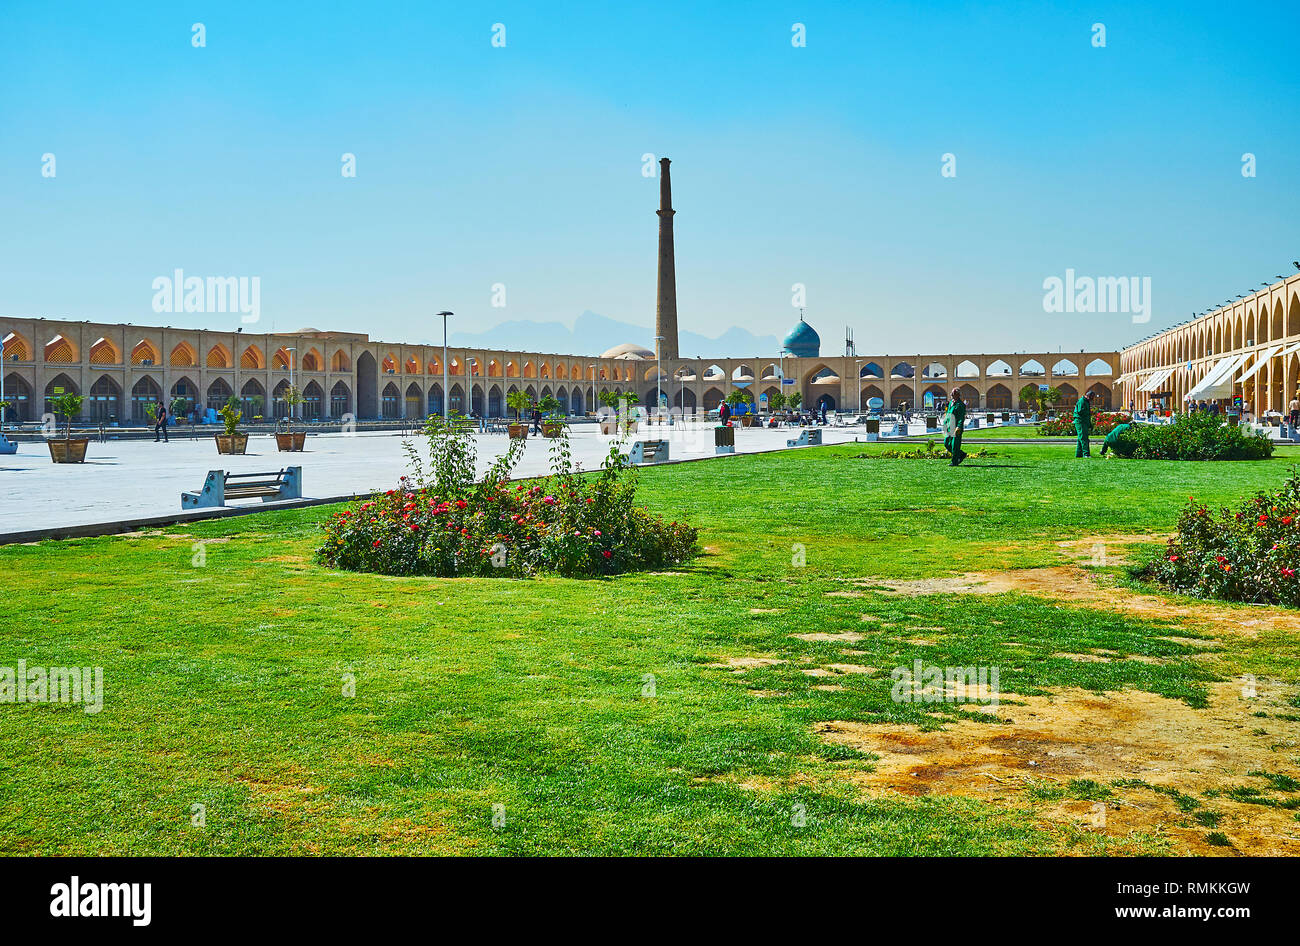 ISFAHAN, IRAN - OCTOBER 21, 2017: The almost restored Imam Ali (Atiq, Kohneh) Square is decorated with flower beds and lawn; historic bazaar complex a Stock Photo